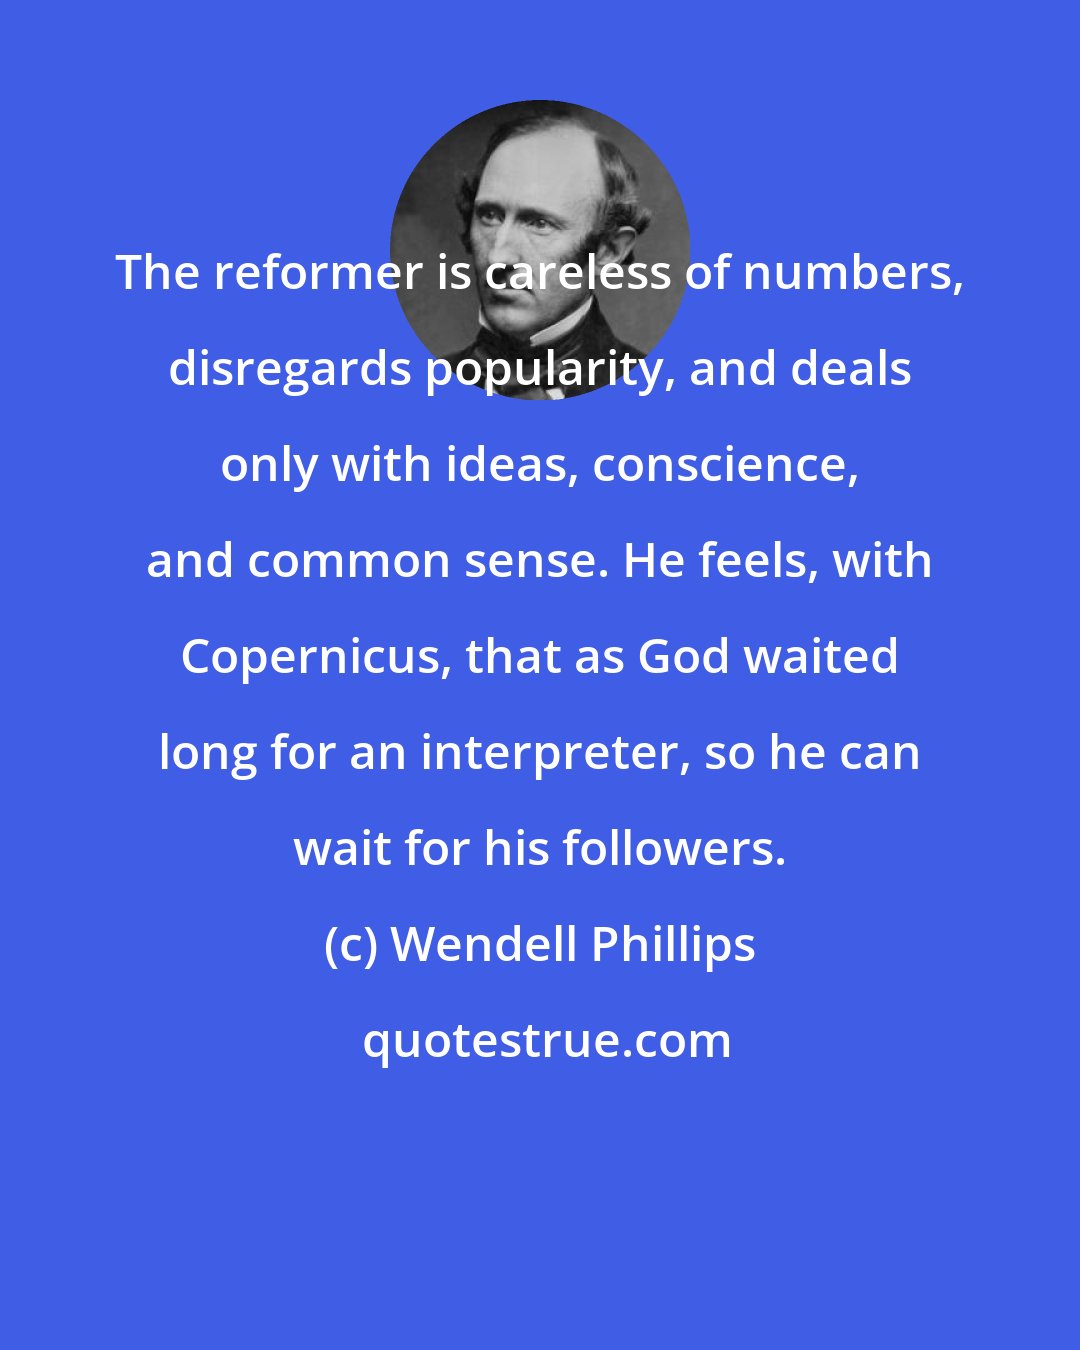 Wendell Phillips: The reformer is careless of numbers, disregards popularity, and deals only with ideas, conscience, and common sense. He feels, with Copernicus, that as God waited long for an interpreter, so he can wait for his followers.